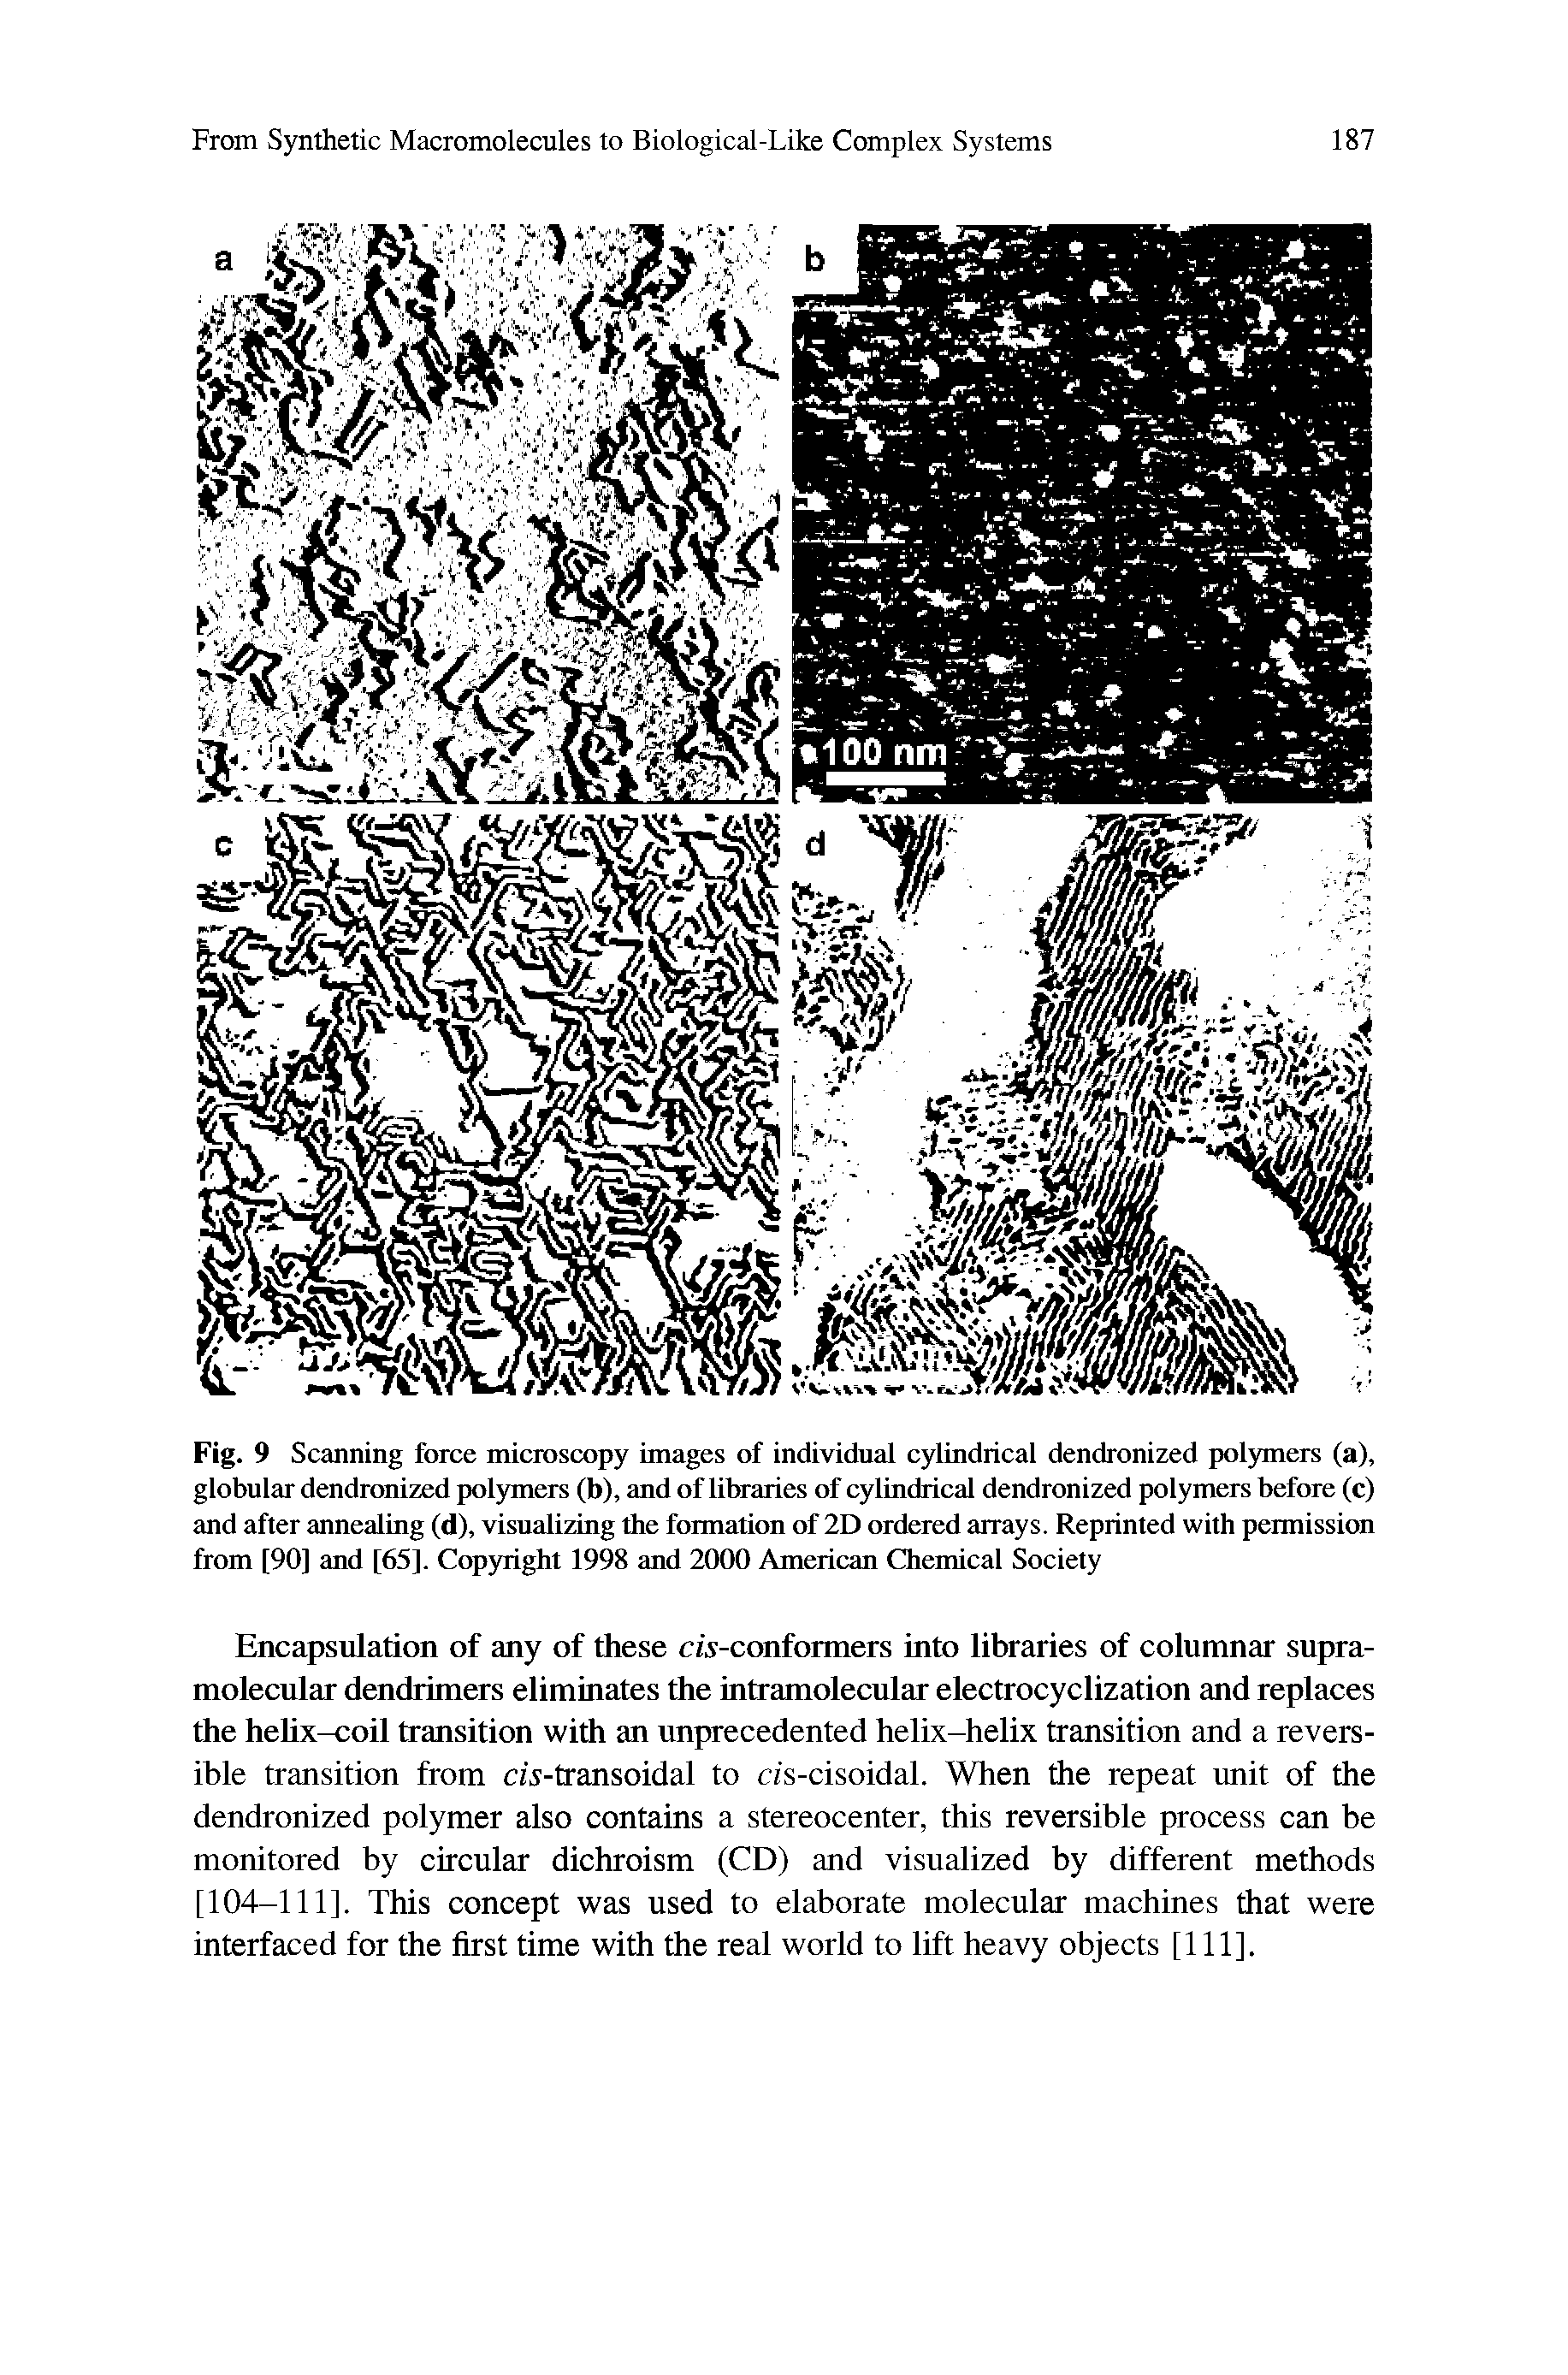 Fig. 9 Scanning force microscopy images of individual cylindrical dendronized polymers (a), globular dendronized polymers (b), and of libraries of cylindrical dendronized polymers before (c) and after annealing (d), visualizing the formation of 2D ordered arrays. Reprinted with permission from [90] and [65]. Copyright 1998 and 2000 American Chemical Society...